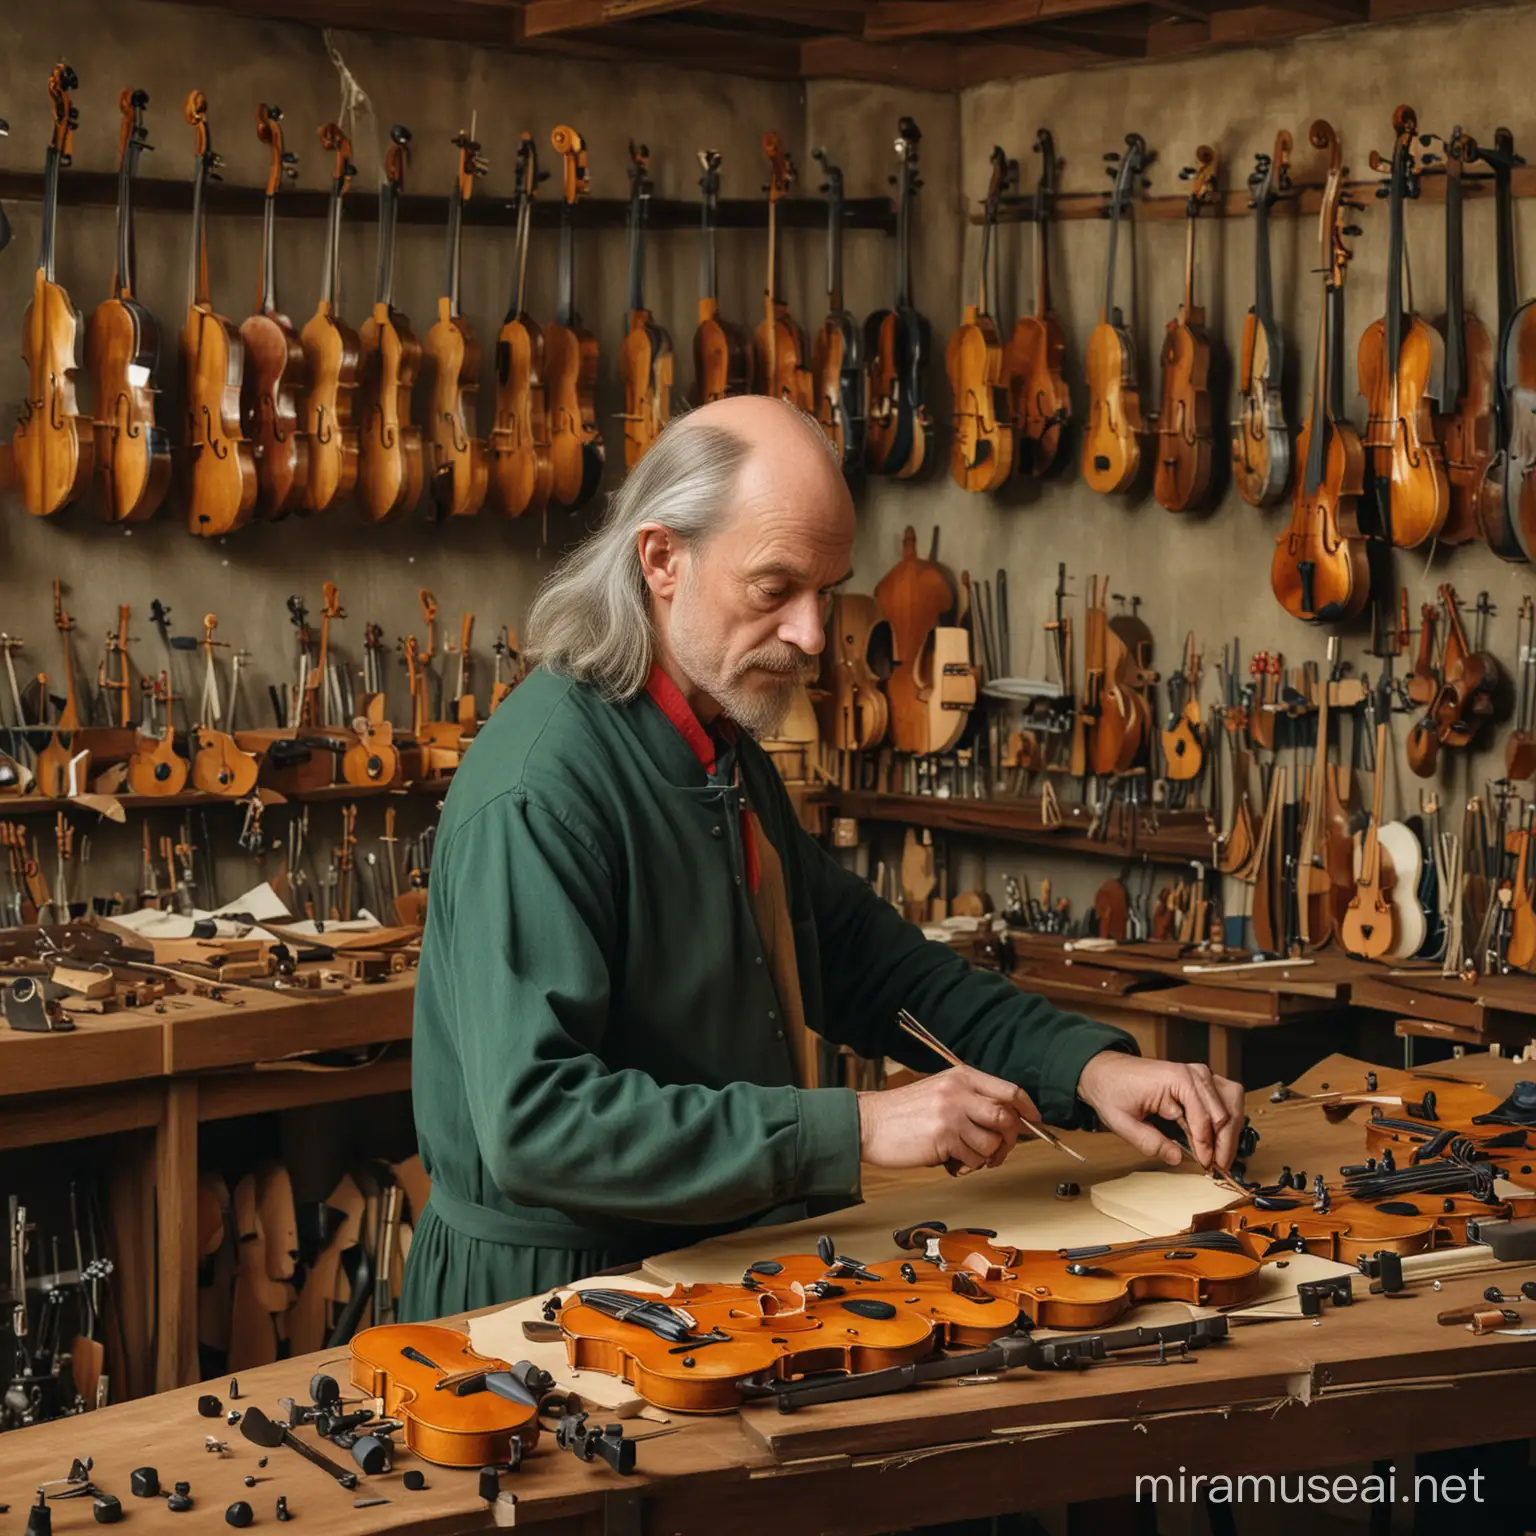 Hieronymus Bosch, the luthier in the workshop makes violins, vivid colors